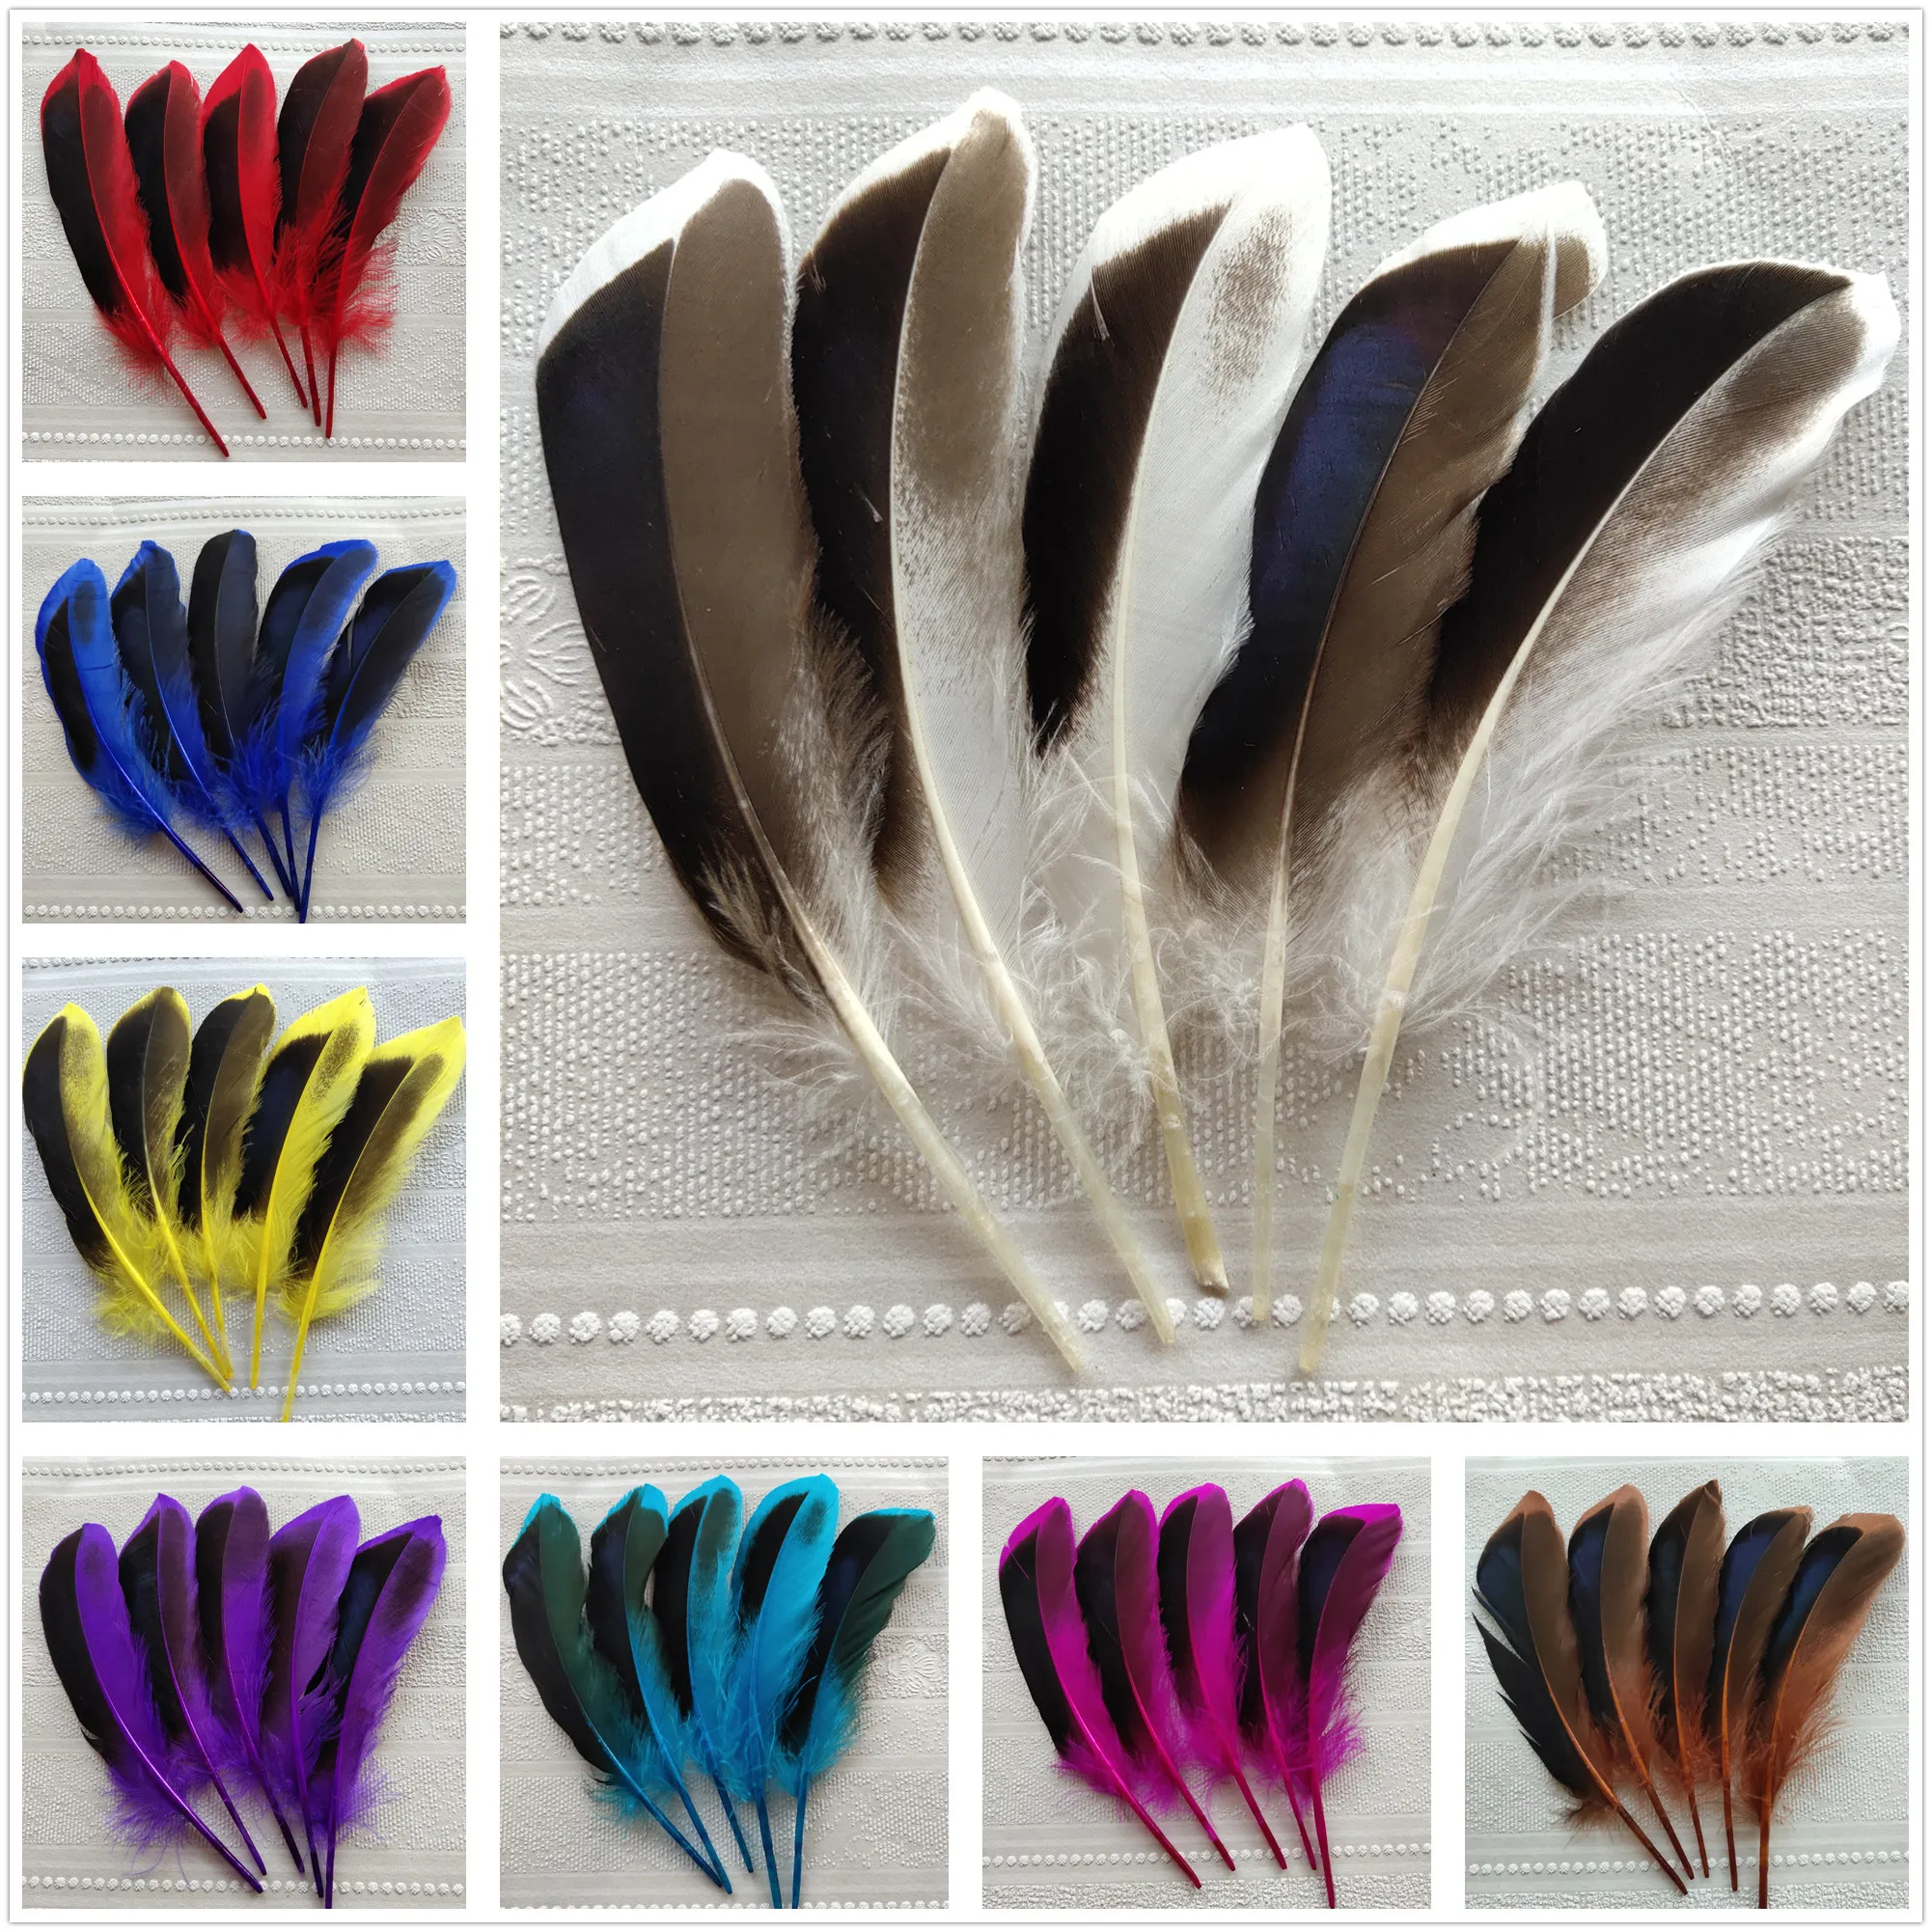 50/100pcs high beautiful quality rooster  naturaltail feathers 4-6inches/10-15cm 